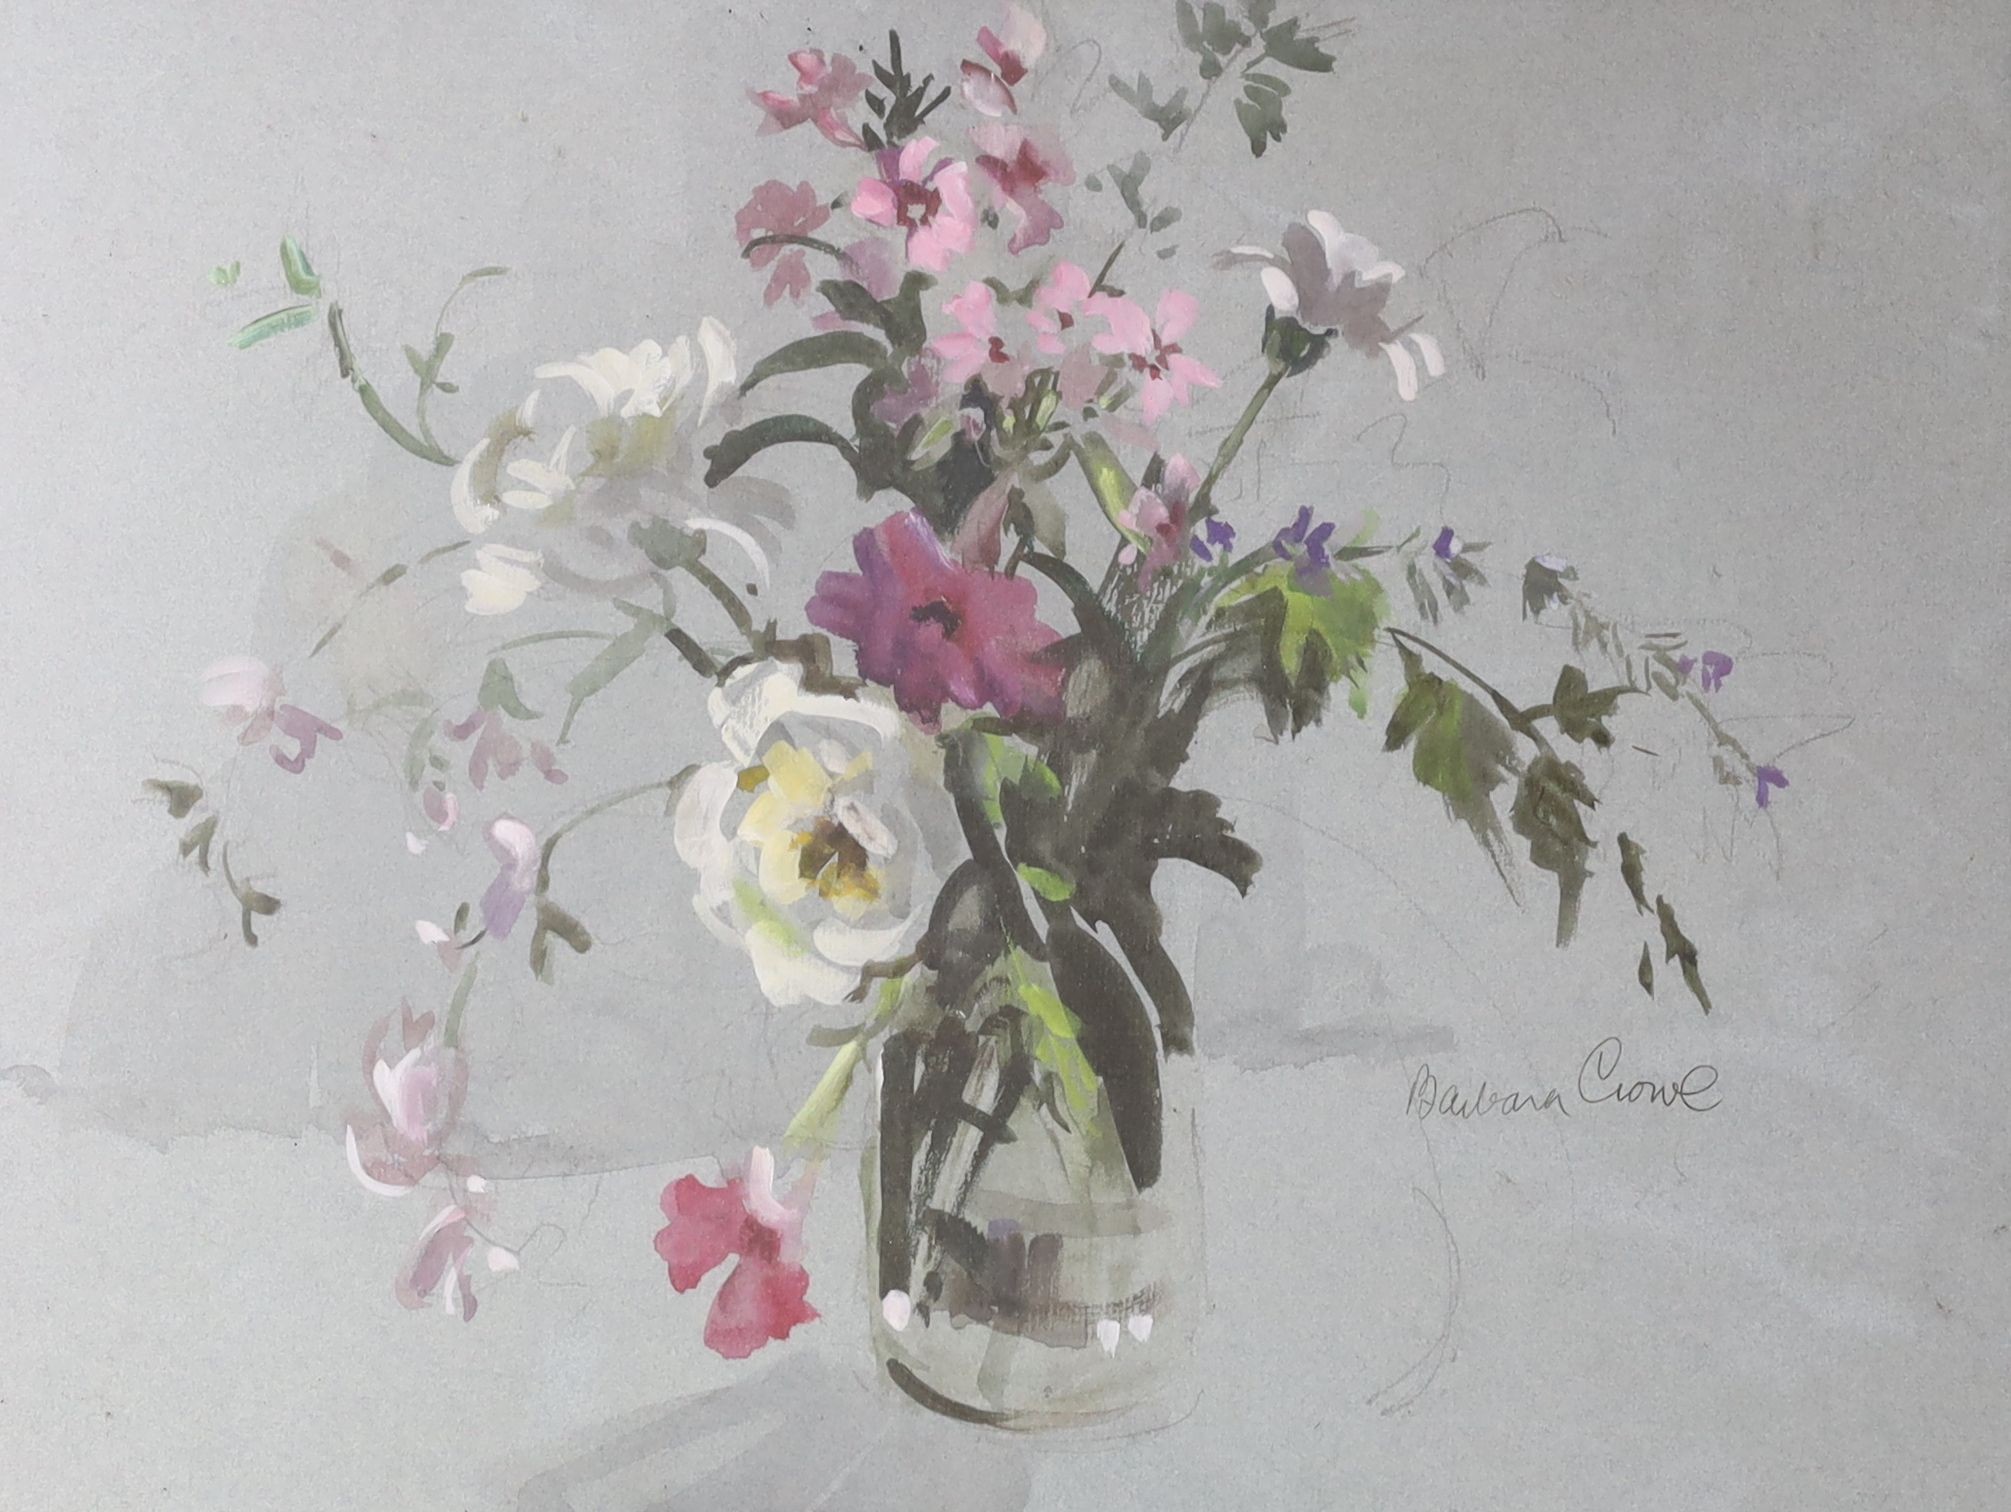 Barbara Crowe (1942-), watercolour, Still life of flowers in a glass vase, signed, 34 x 44cm